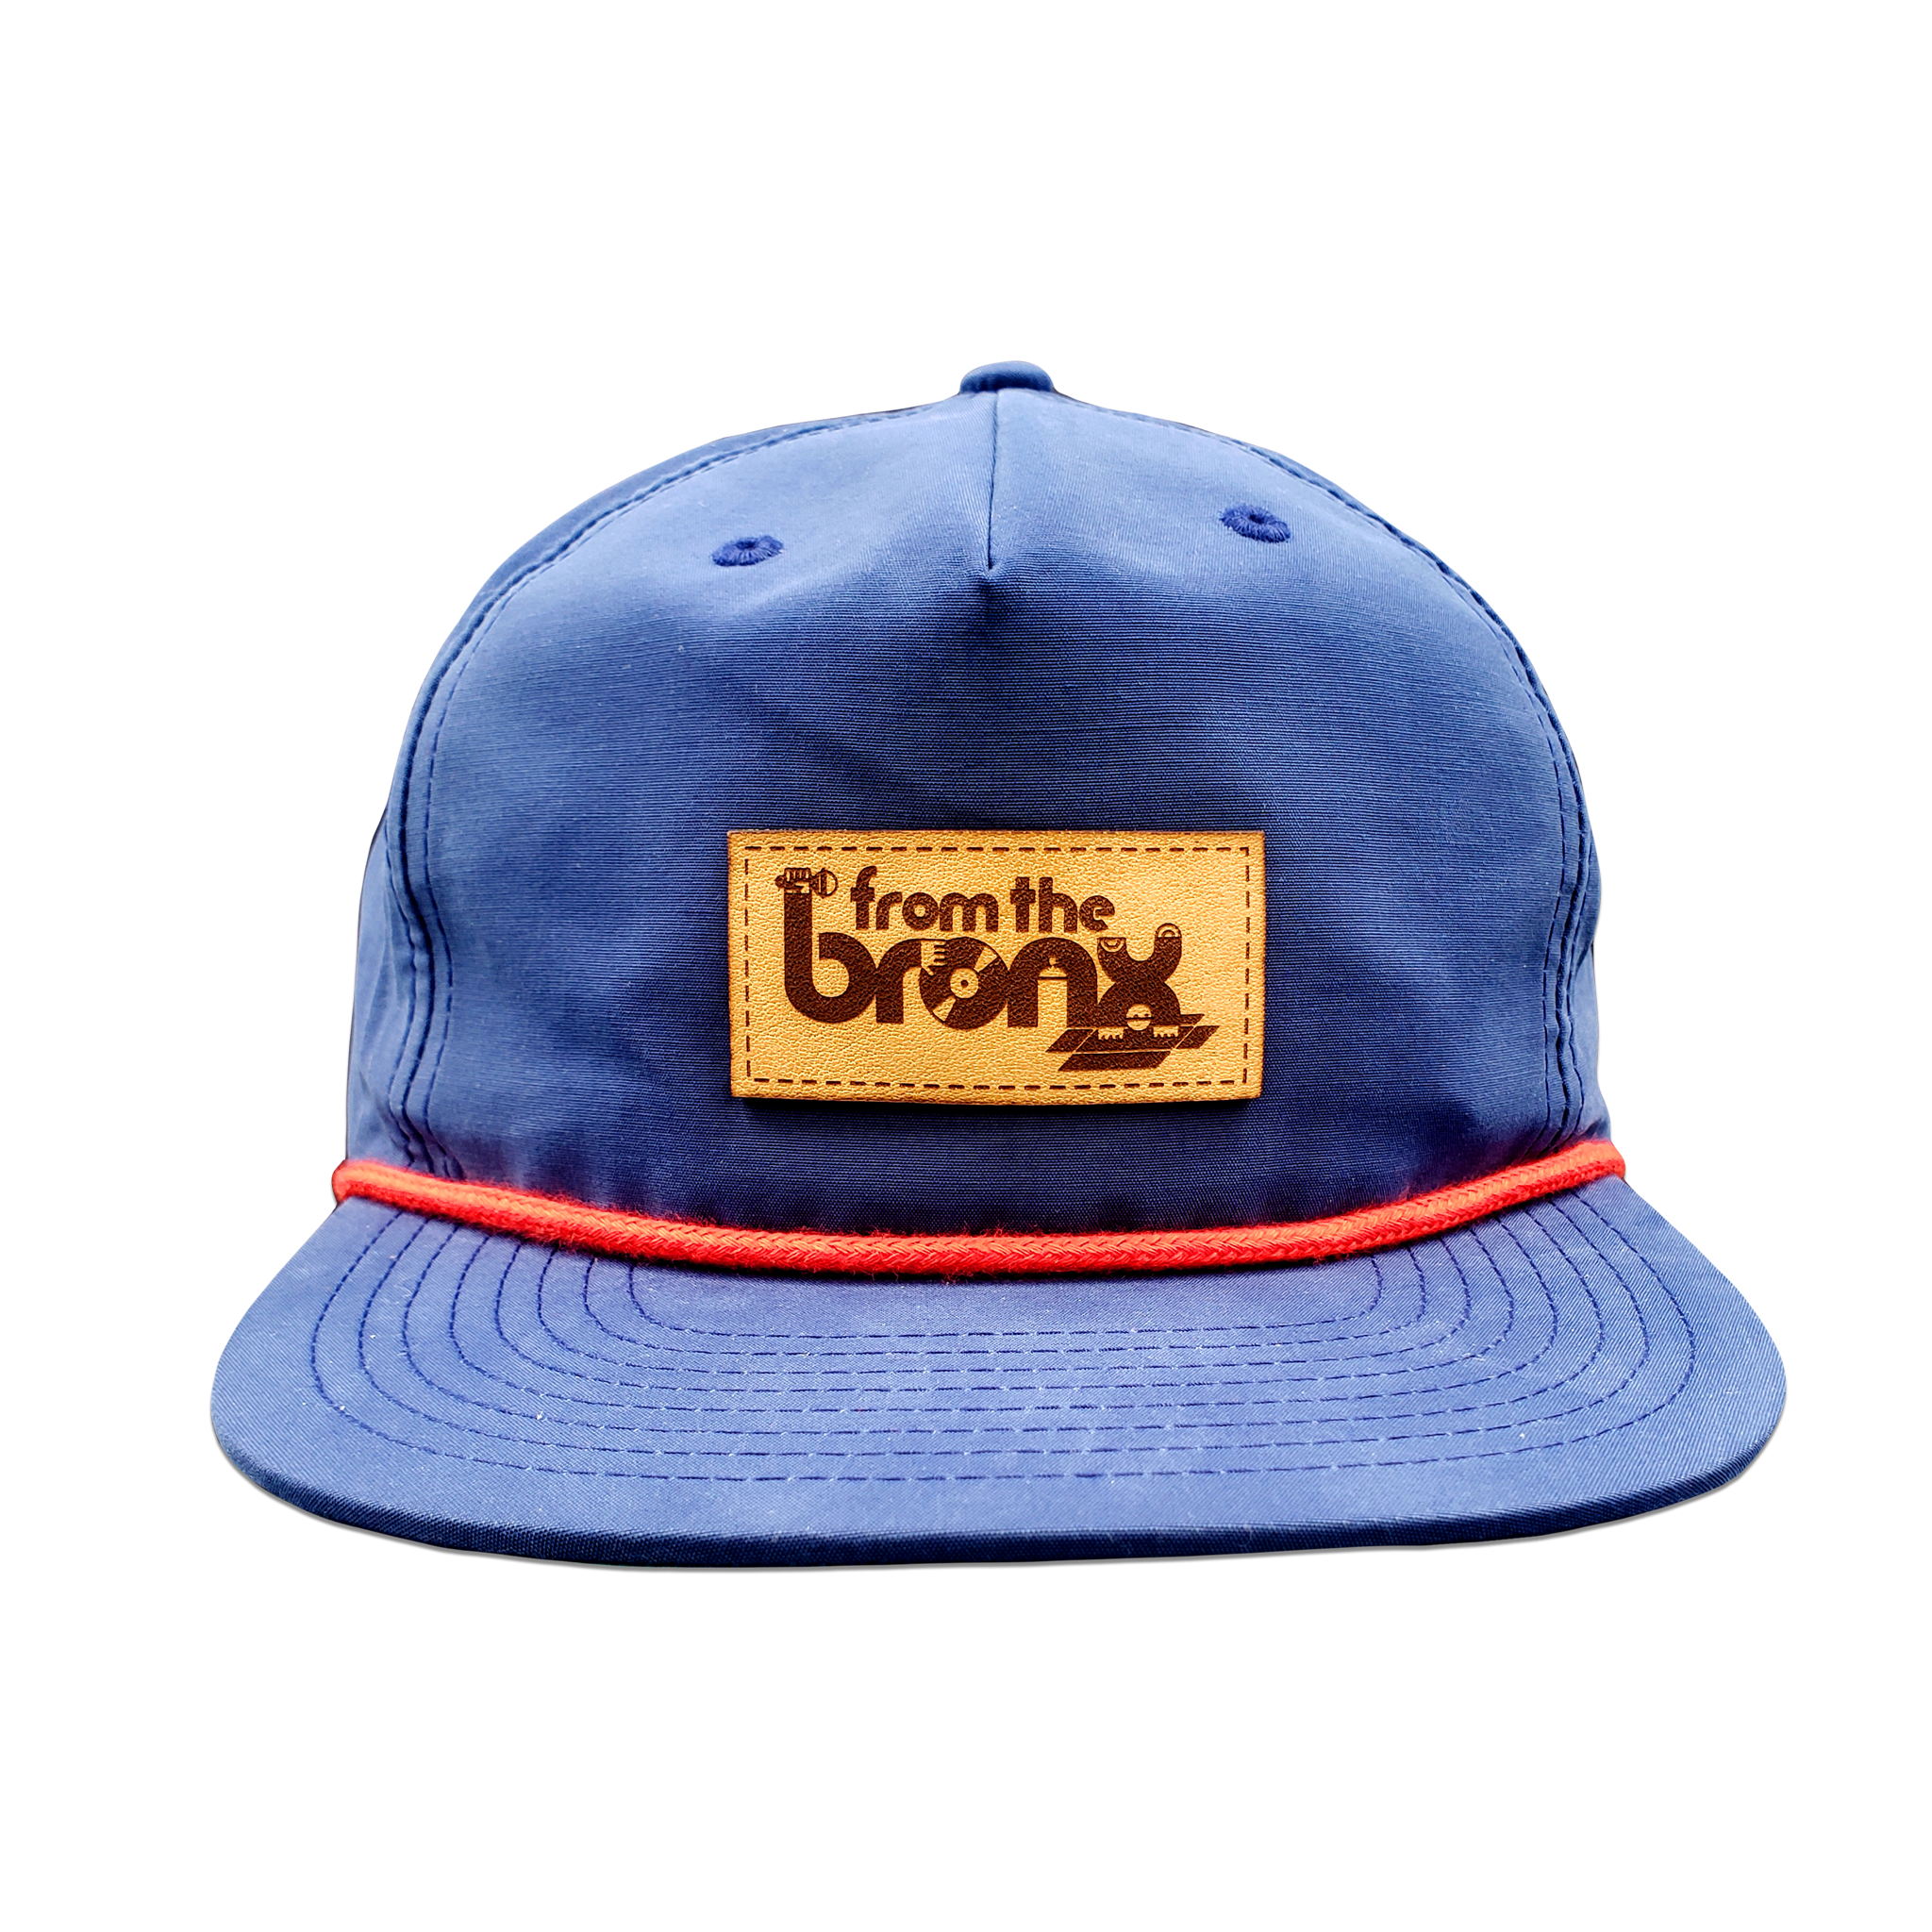 From The Bronx Granddad Hat Front in Navy